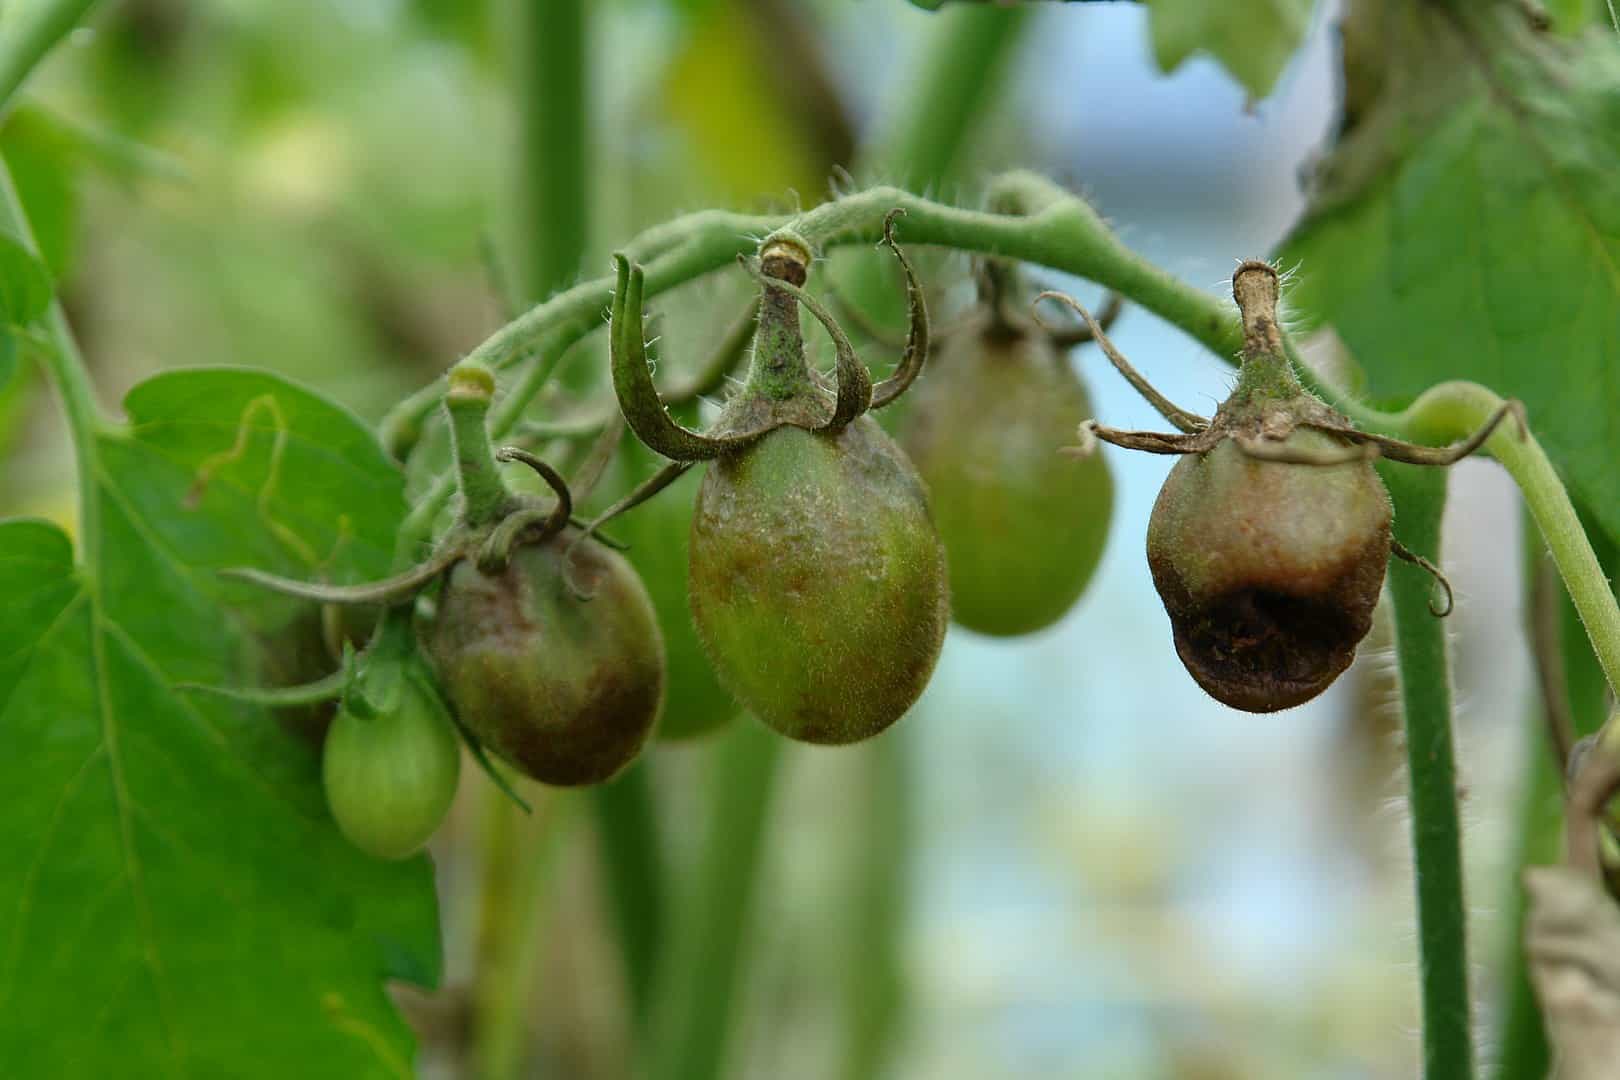 late blight in tomatoes